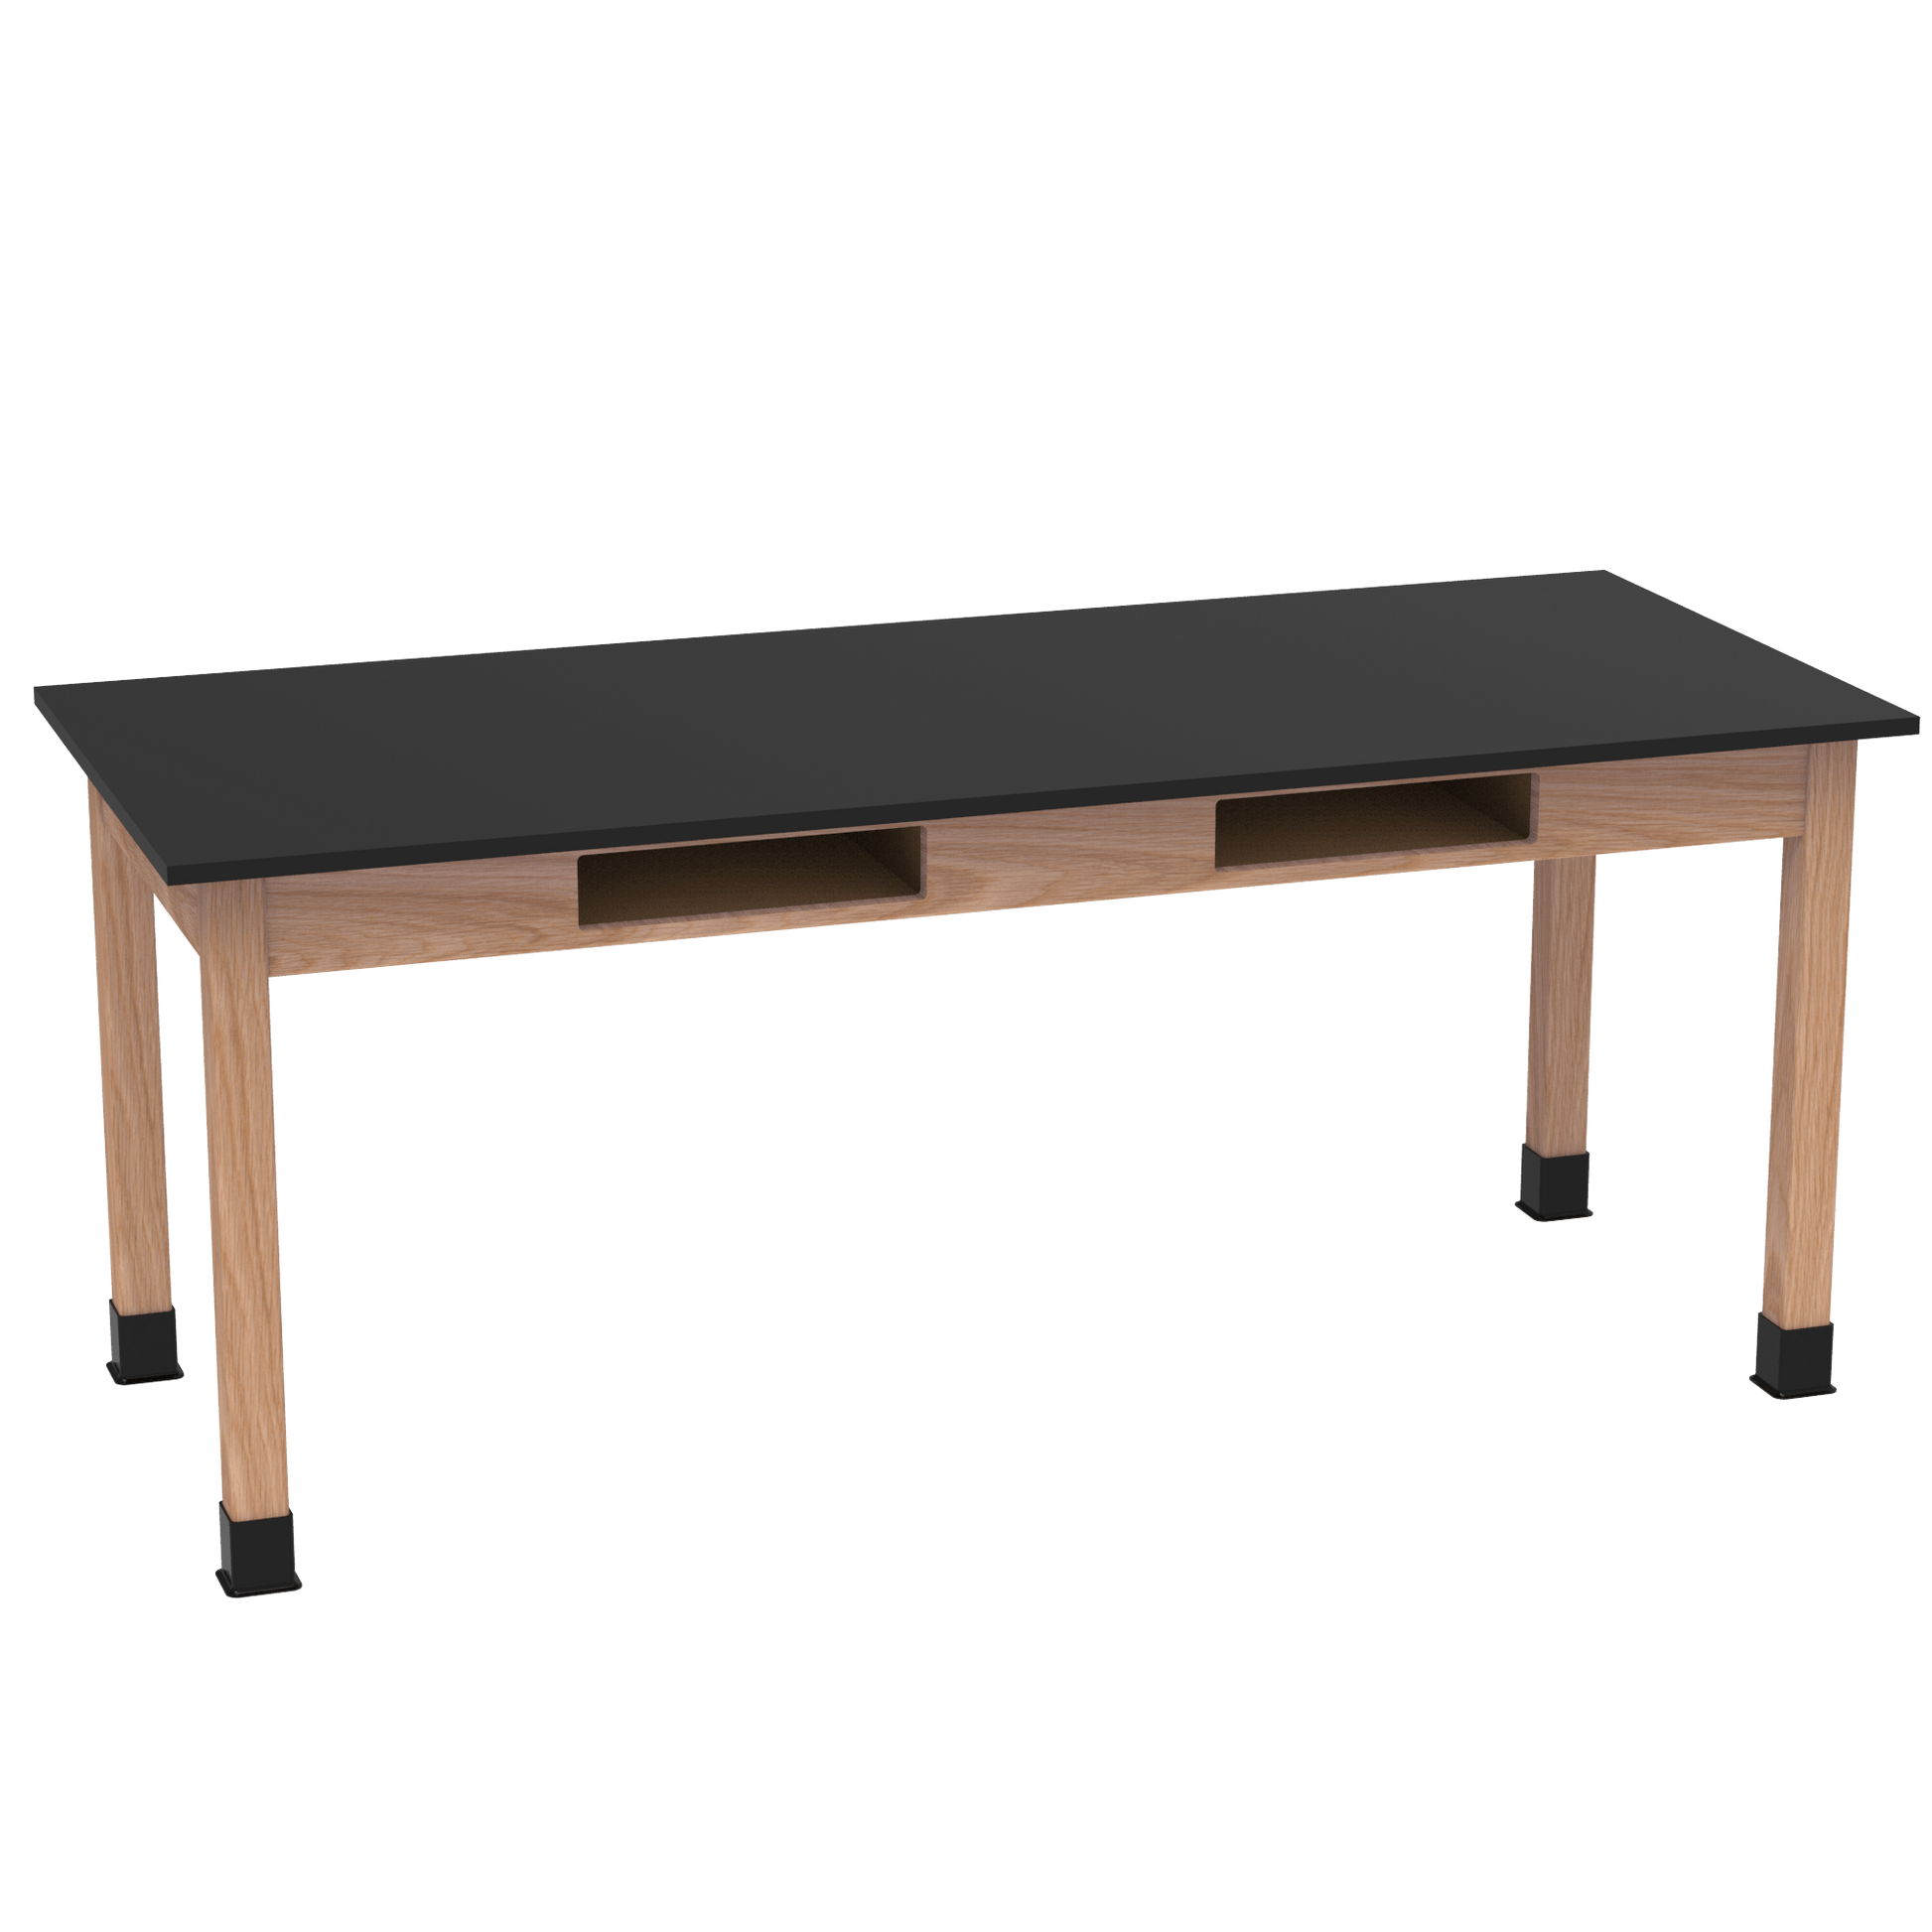 Diversified Woodcrafts Science Table w/ Book Compartment - 72" W x 30" D - Solid Oak Frame and Adjustable Glides - SchoolOutlet